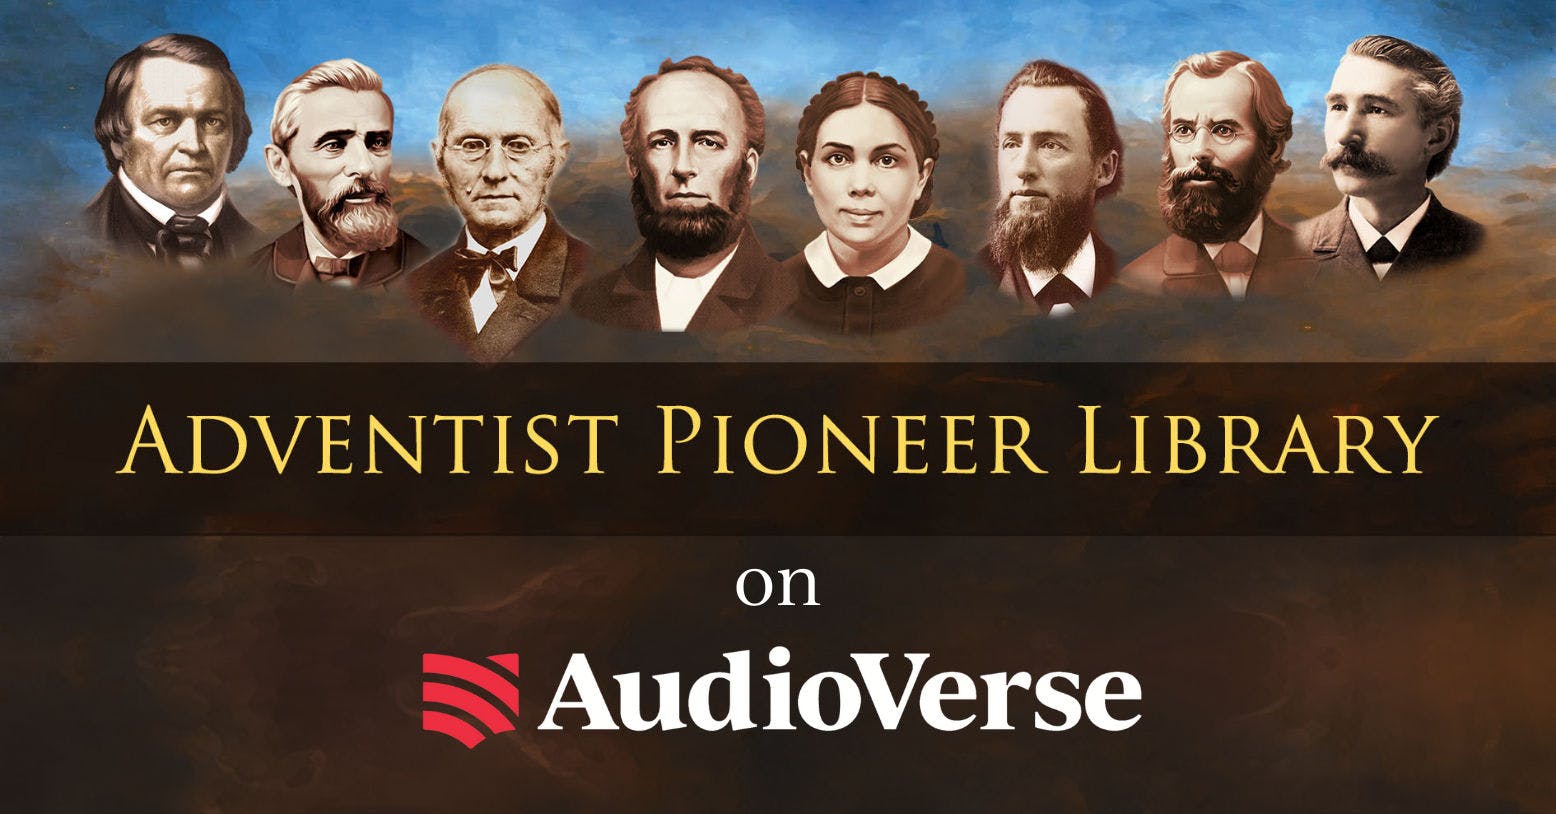 Adventist Pioneer Library is Coming to AudioVerse